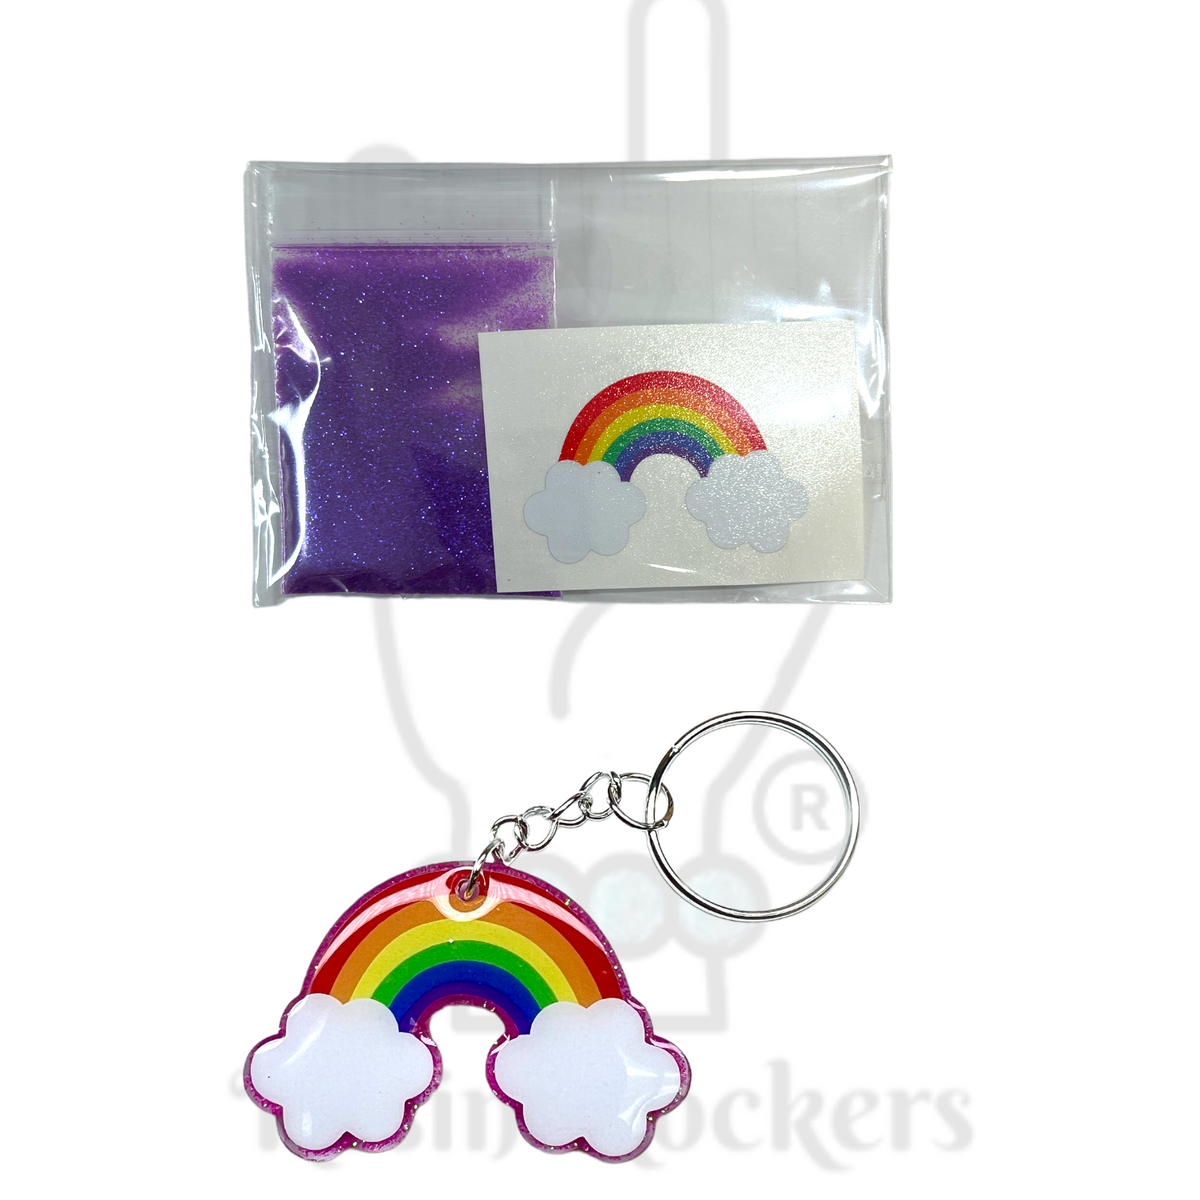 Rainbow With Clouds Acrylic Blank With Decal Keychain Kit